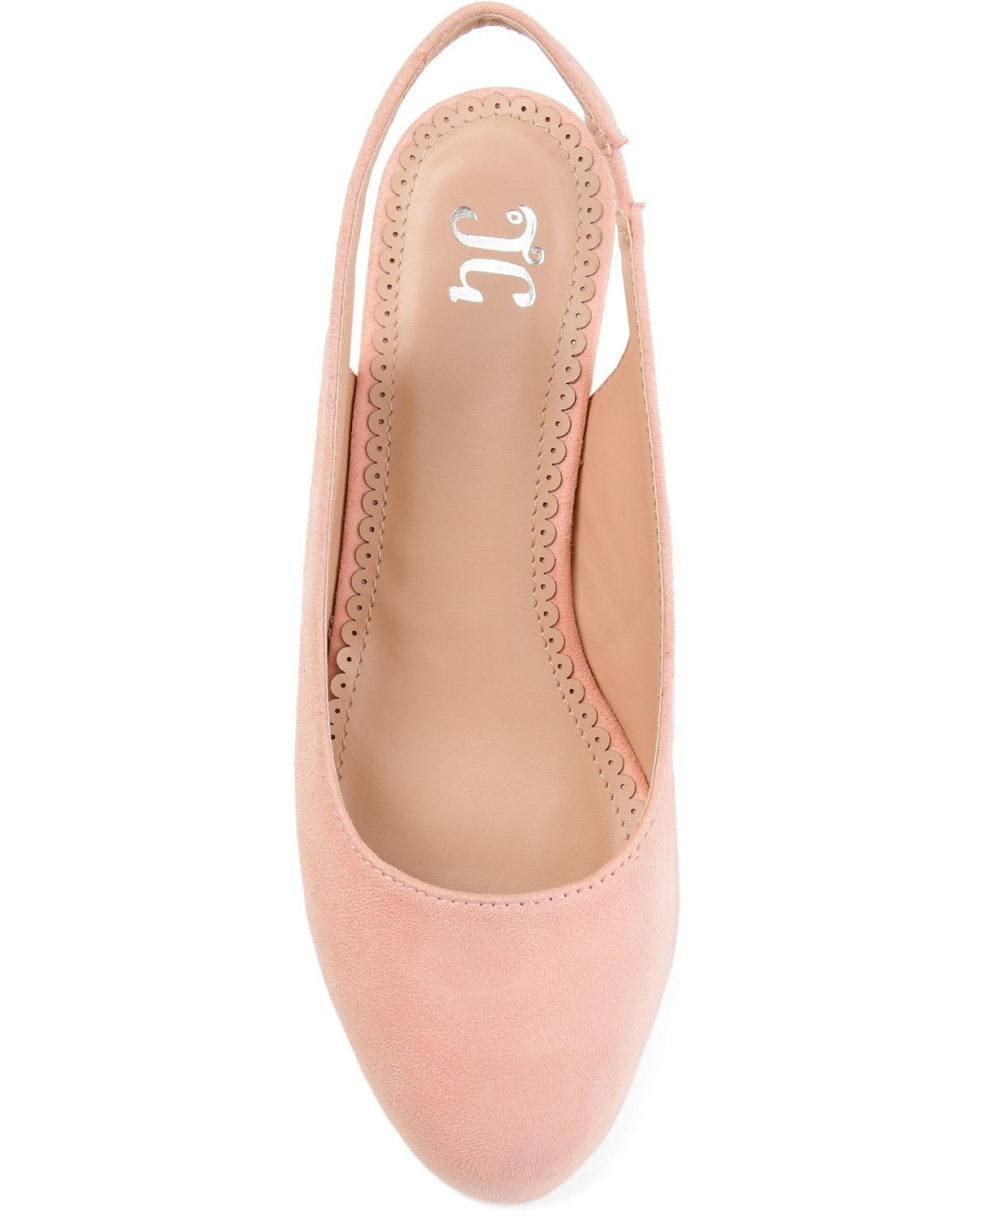 woocommerce-673321-2209615.cloudwaysapps.com-journee-collection-womens-pink-zippy-pumps